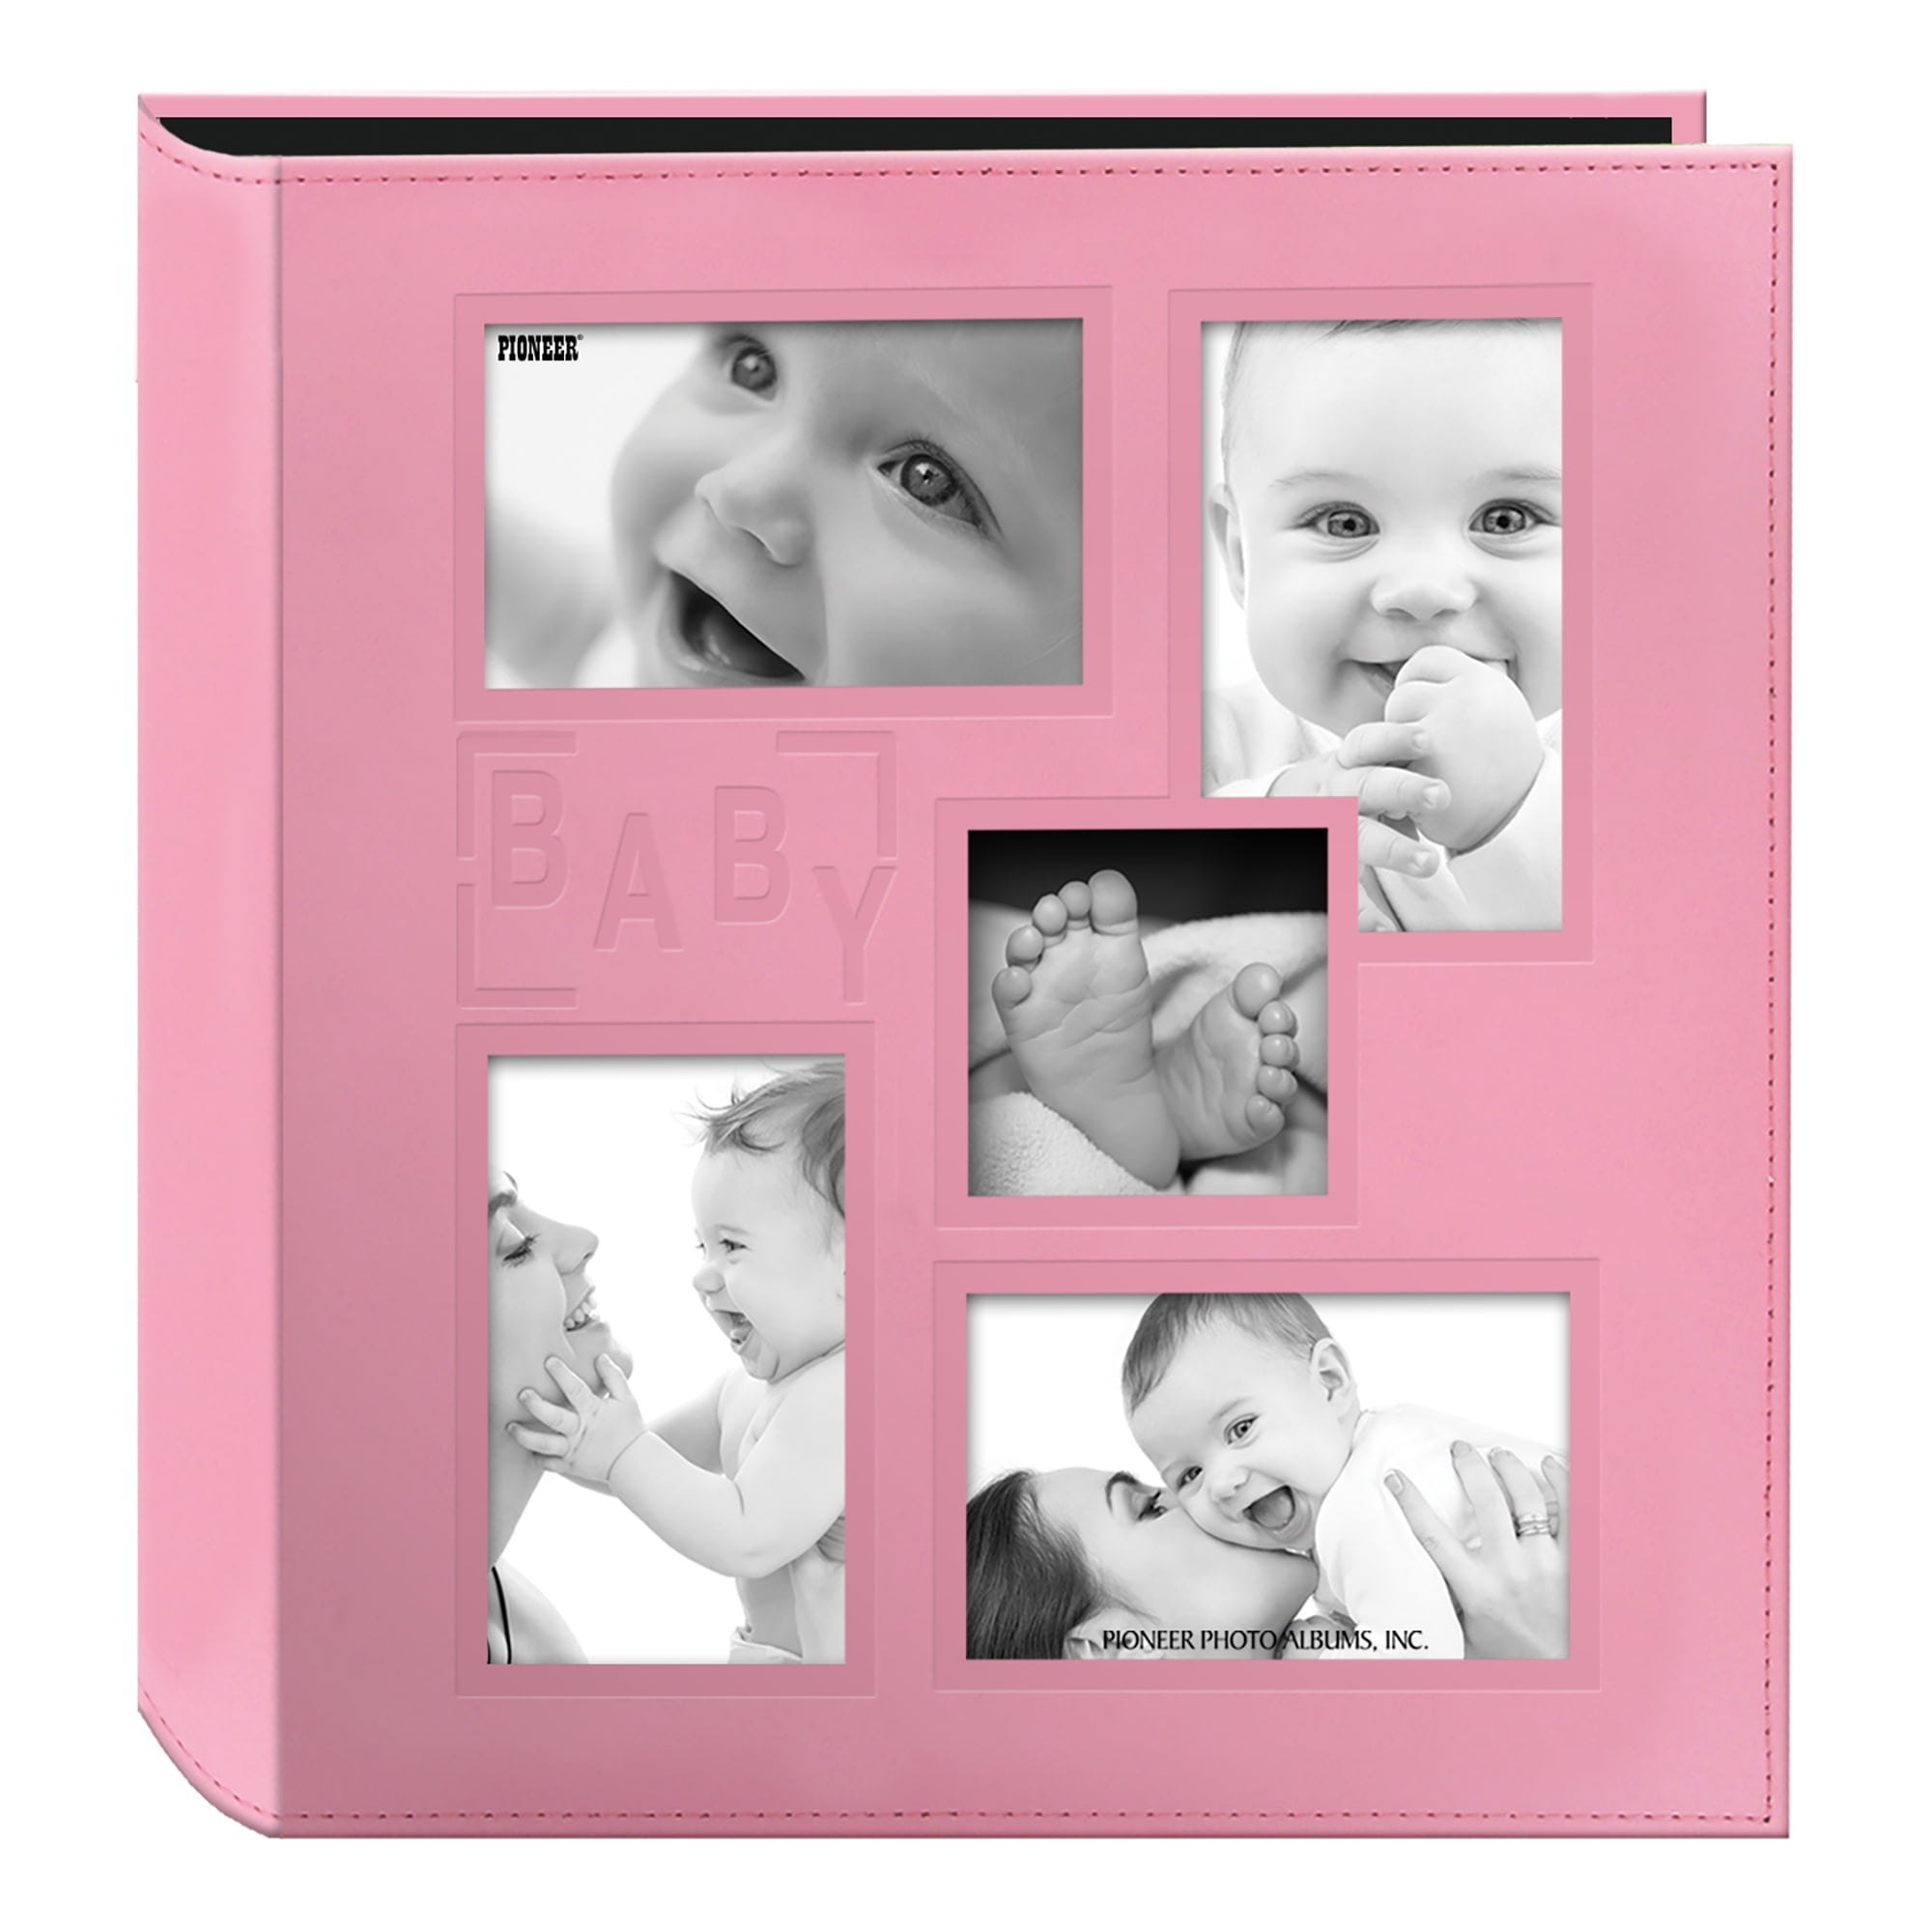 Pioneer Photo Albums Dreamy Pink Baby Fabric Frame Cover Scrapbook - 12 inch x 12 inch